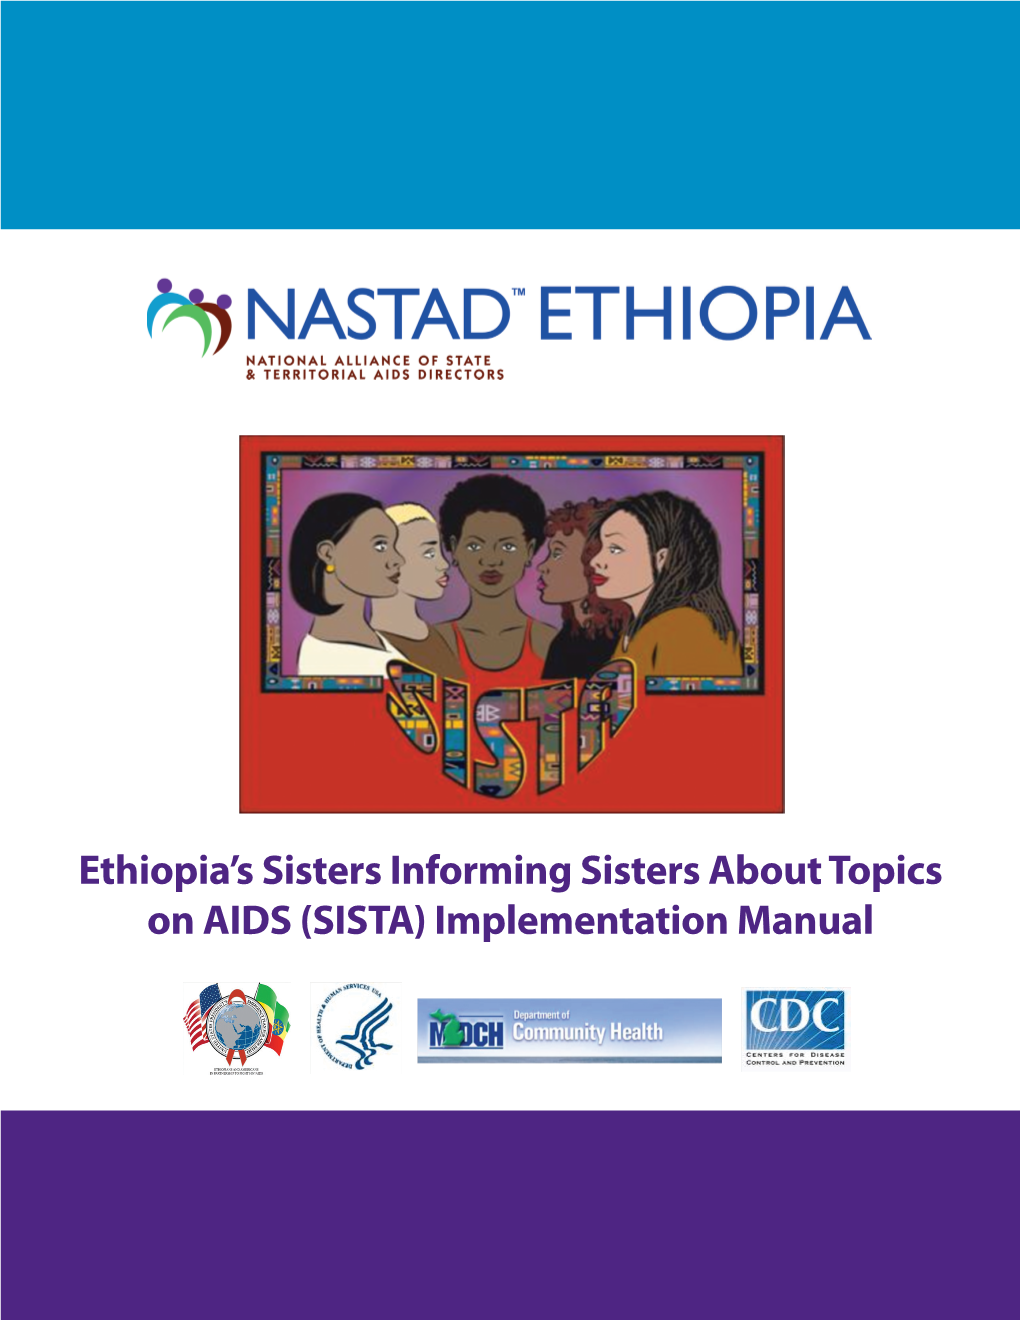 Ethiopia's Sisters Informing Sisters About Topics on AIDS (SISTA)